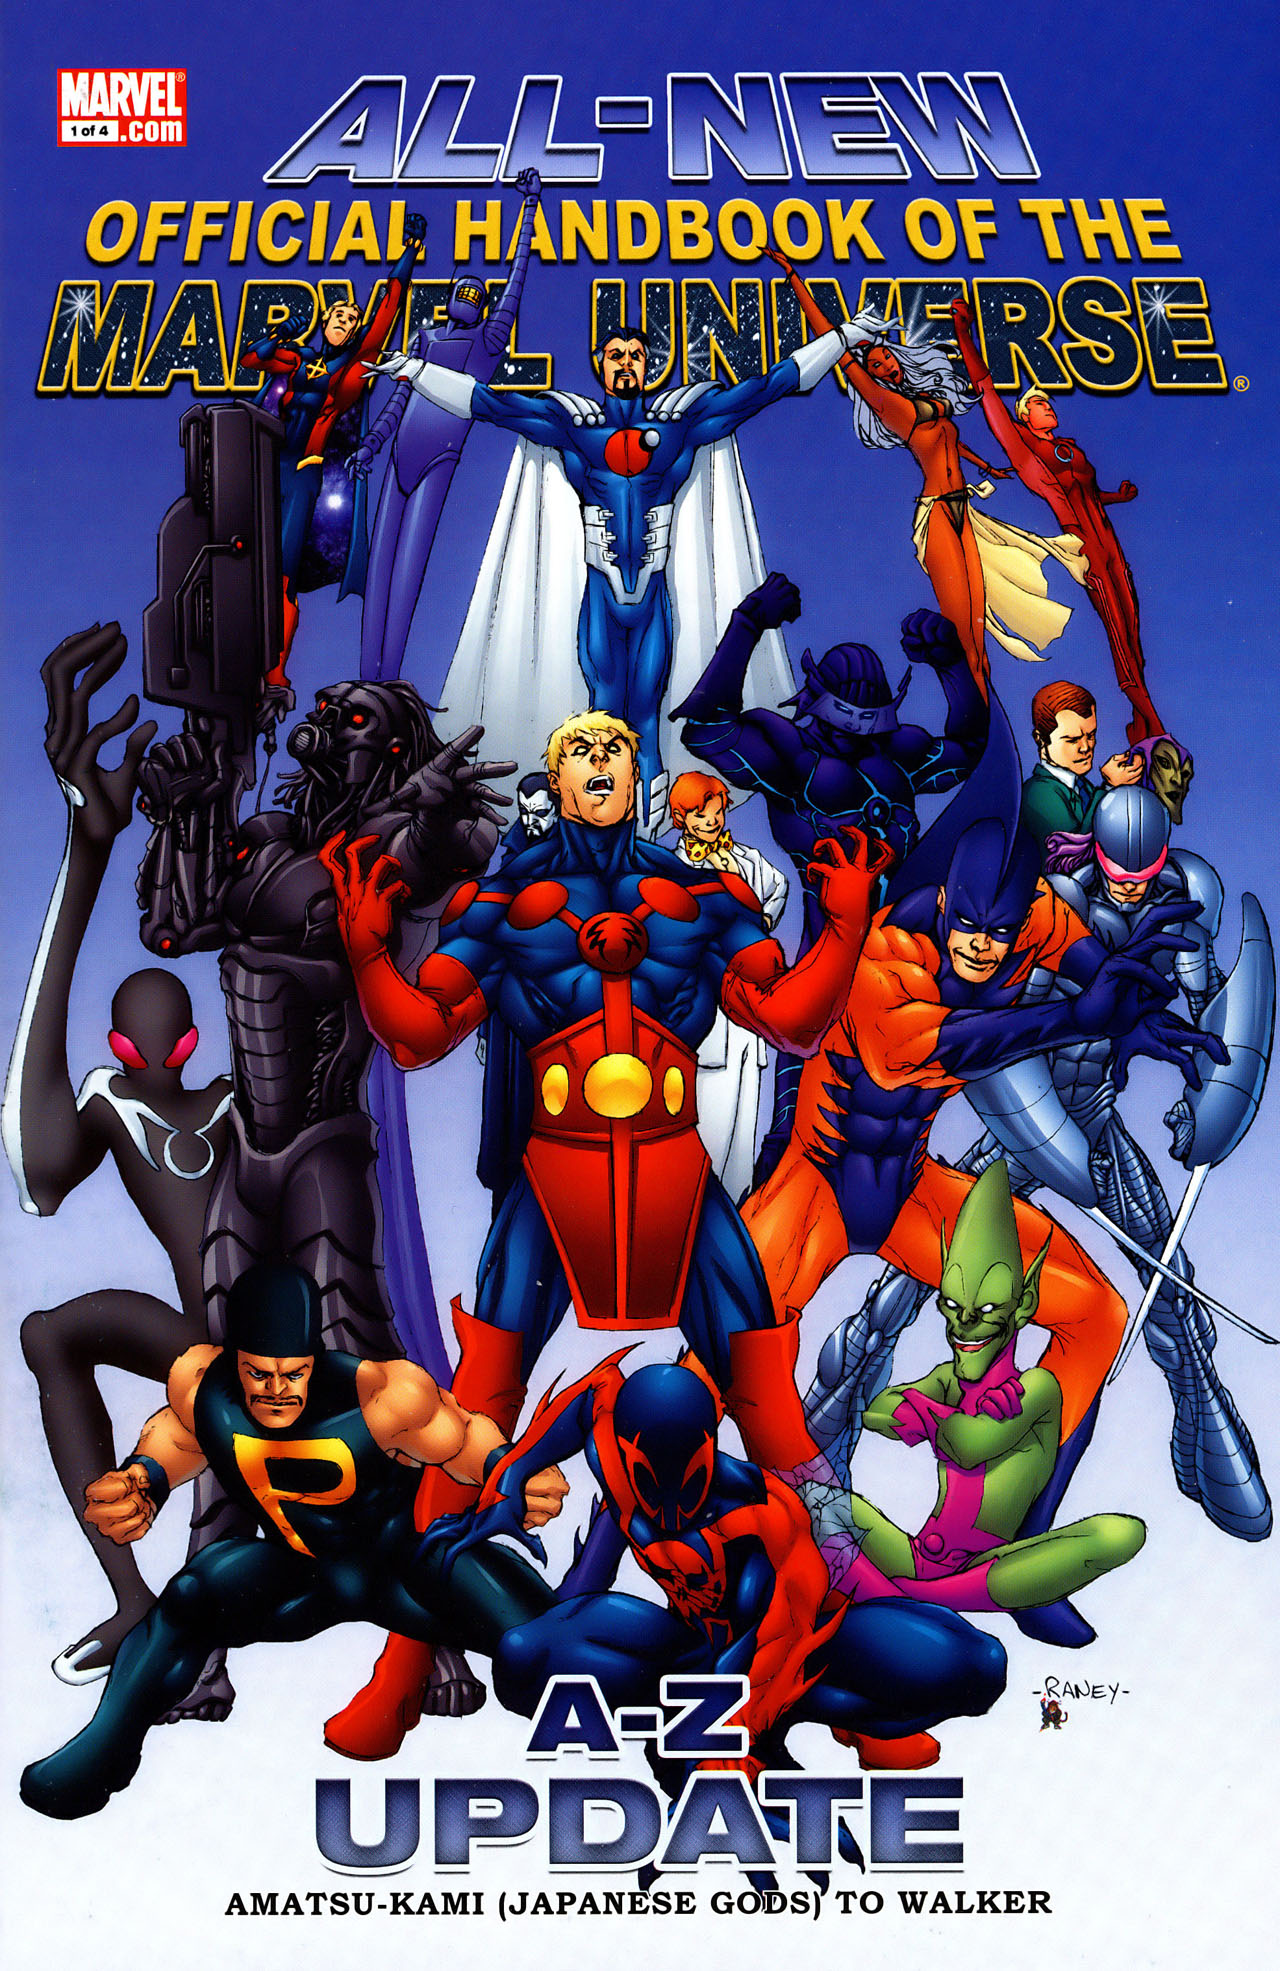 MARVEL Universe MANUALE UFFICIALE VOL 3 #15-20 Deluxe Edition GN 9780785119364 